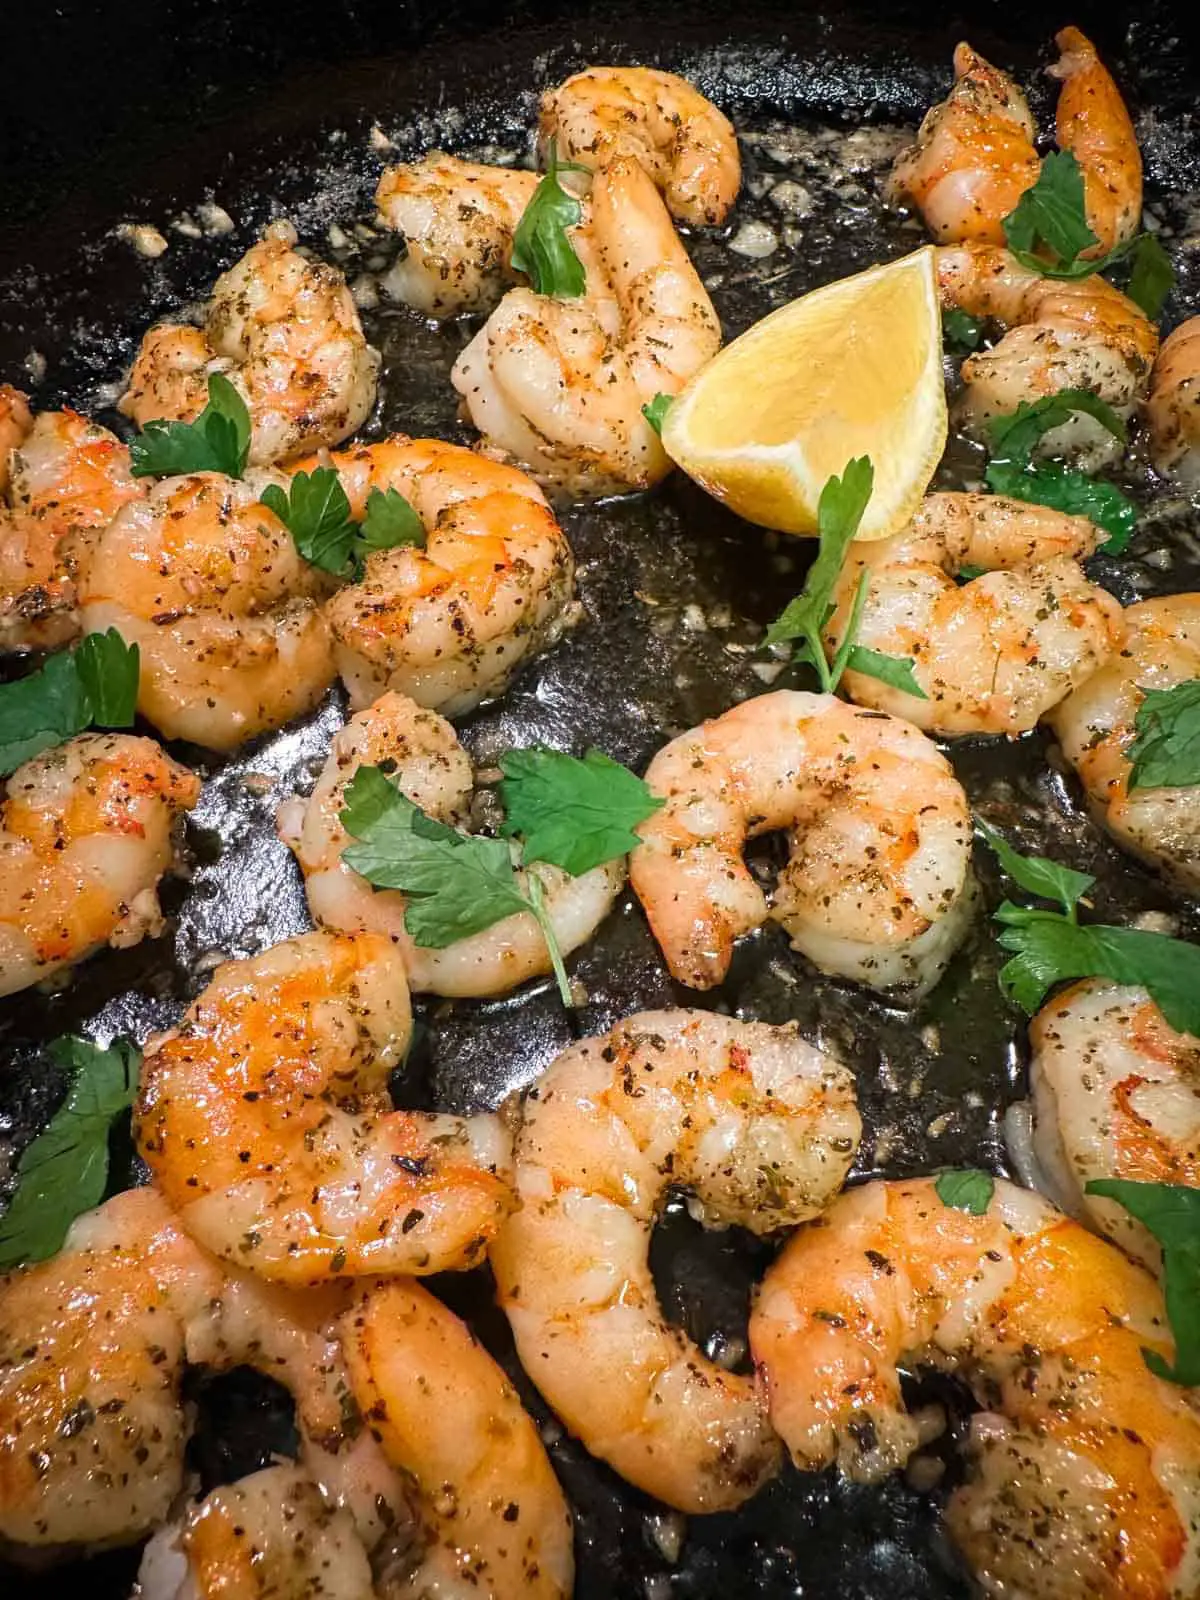 Pieces of cooked shrimp garnished with parsley and wedges of lemon in a cast iron pan.